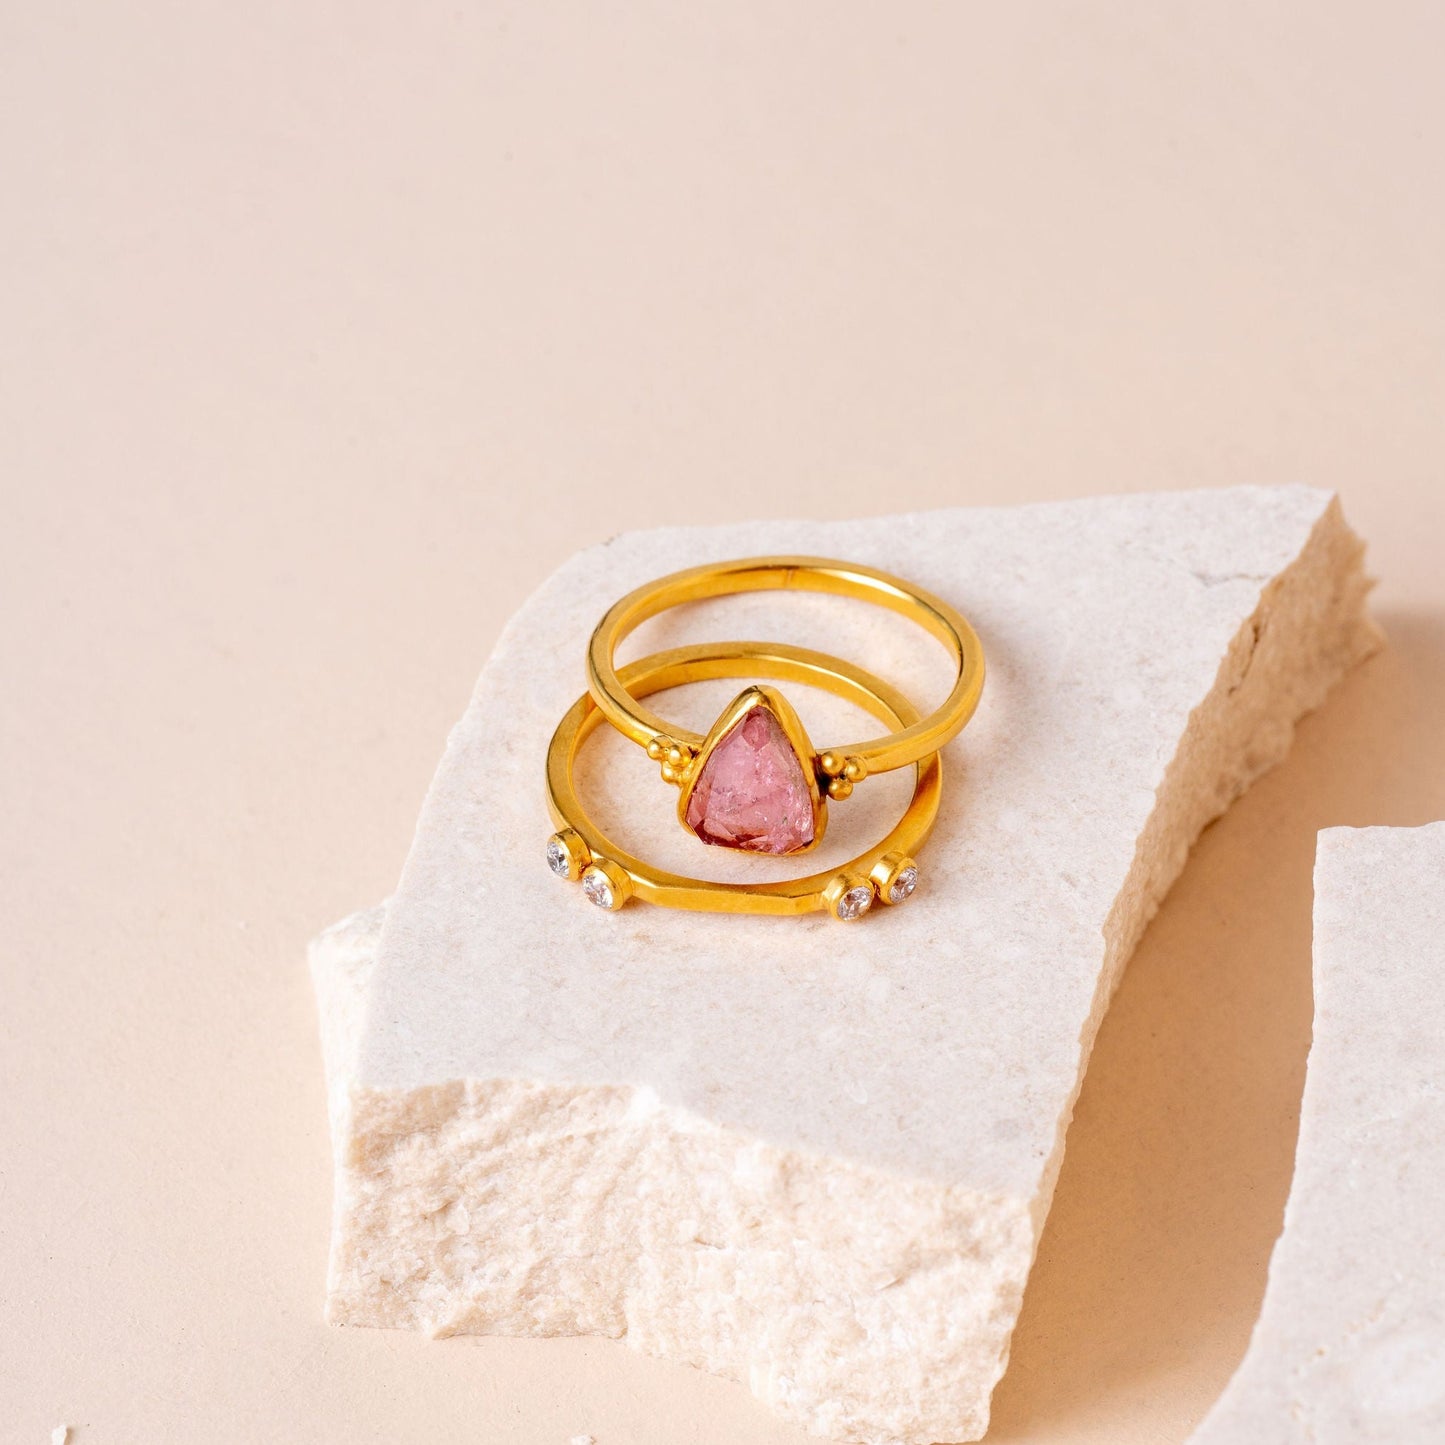 gold ring featuring a pink tourmaline gem and delicate granulation for a touch of sophistication.